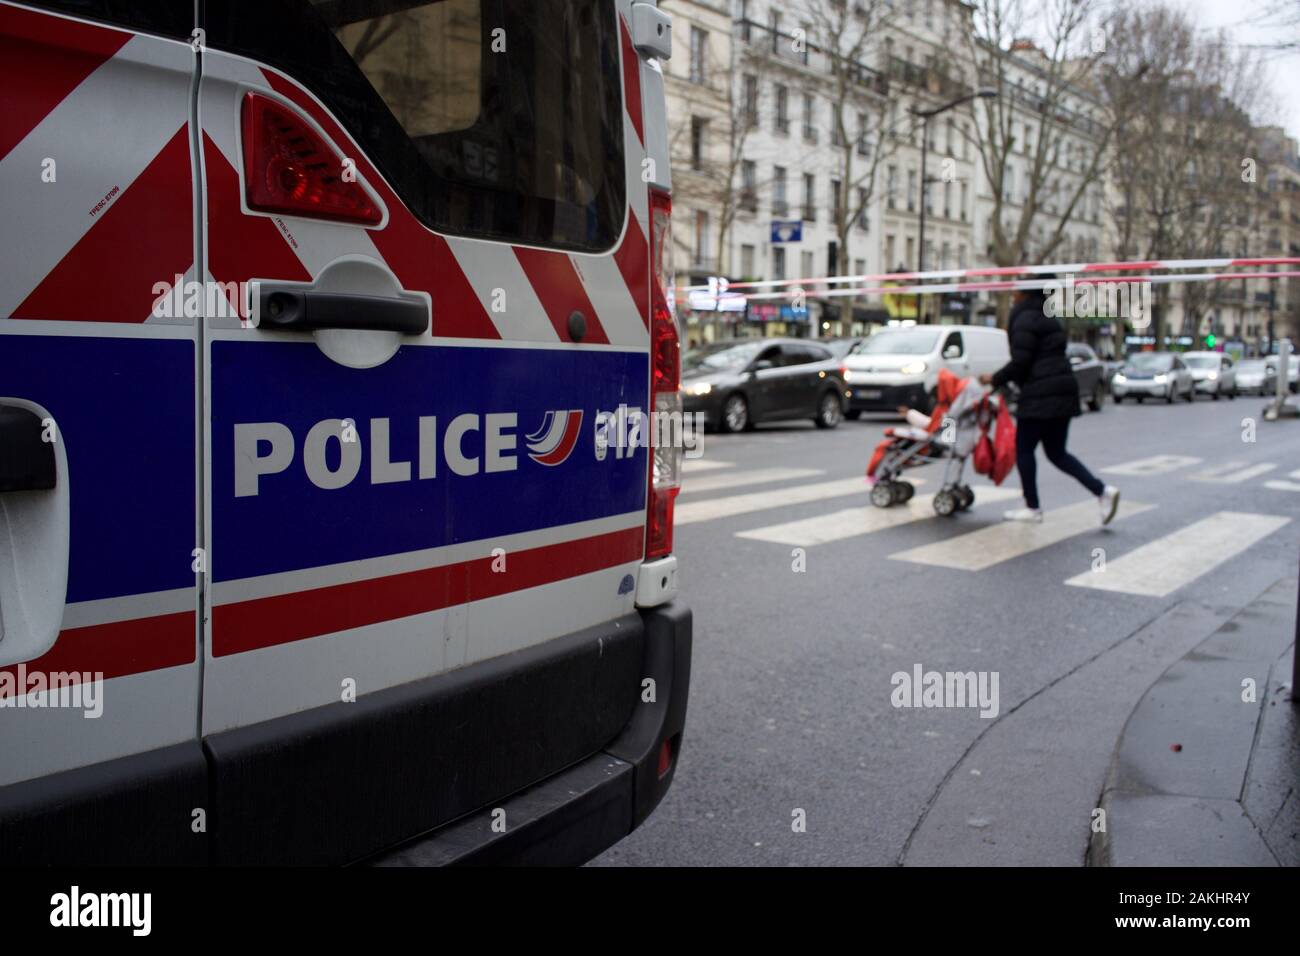 French Police Van and Cordon block road to traffic in anticipation of demonstrations in protest of government pension reforms, as woman with push-chair crosses road, travel disruption during strike (la grève), boulevard Barbès (near gare du nord train station), 75018, Paris, France, 9th January 2020 Stock Photo